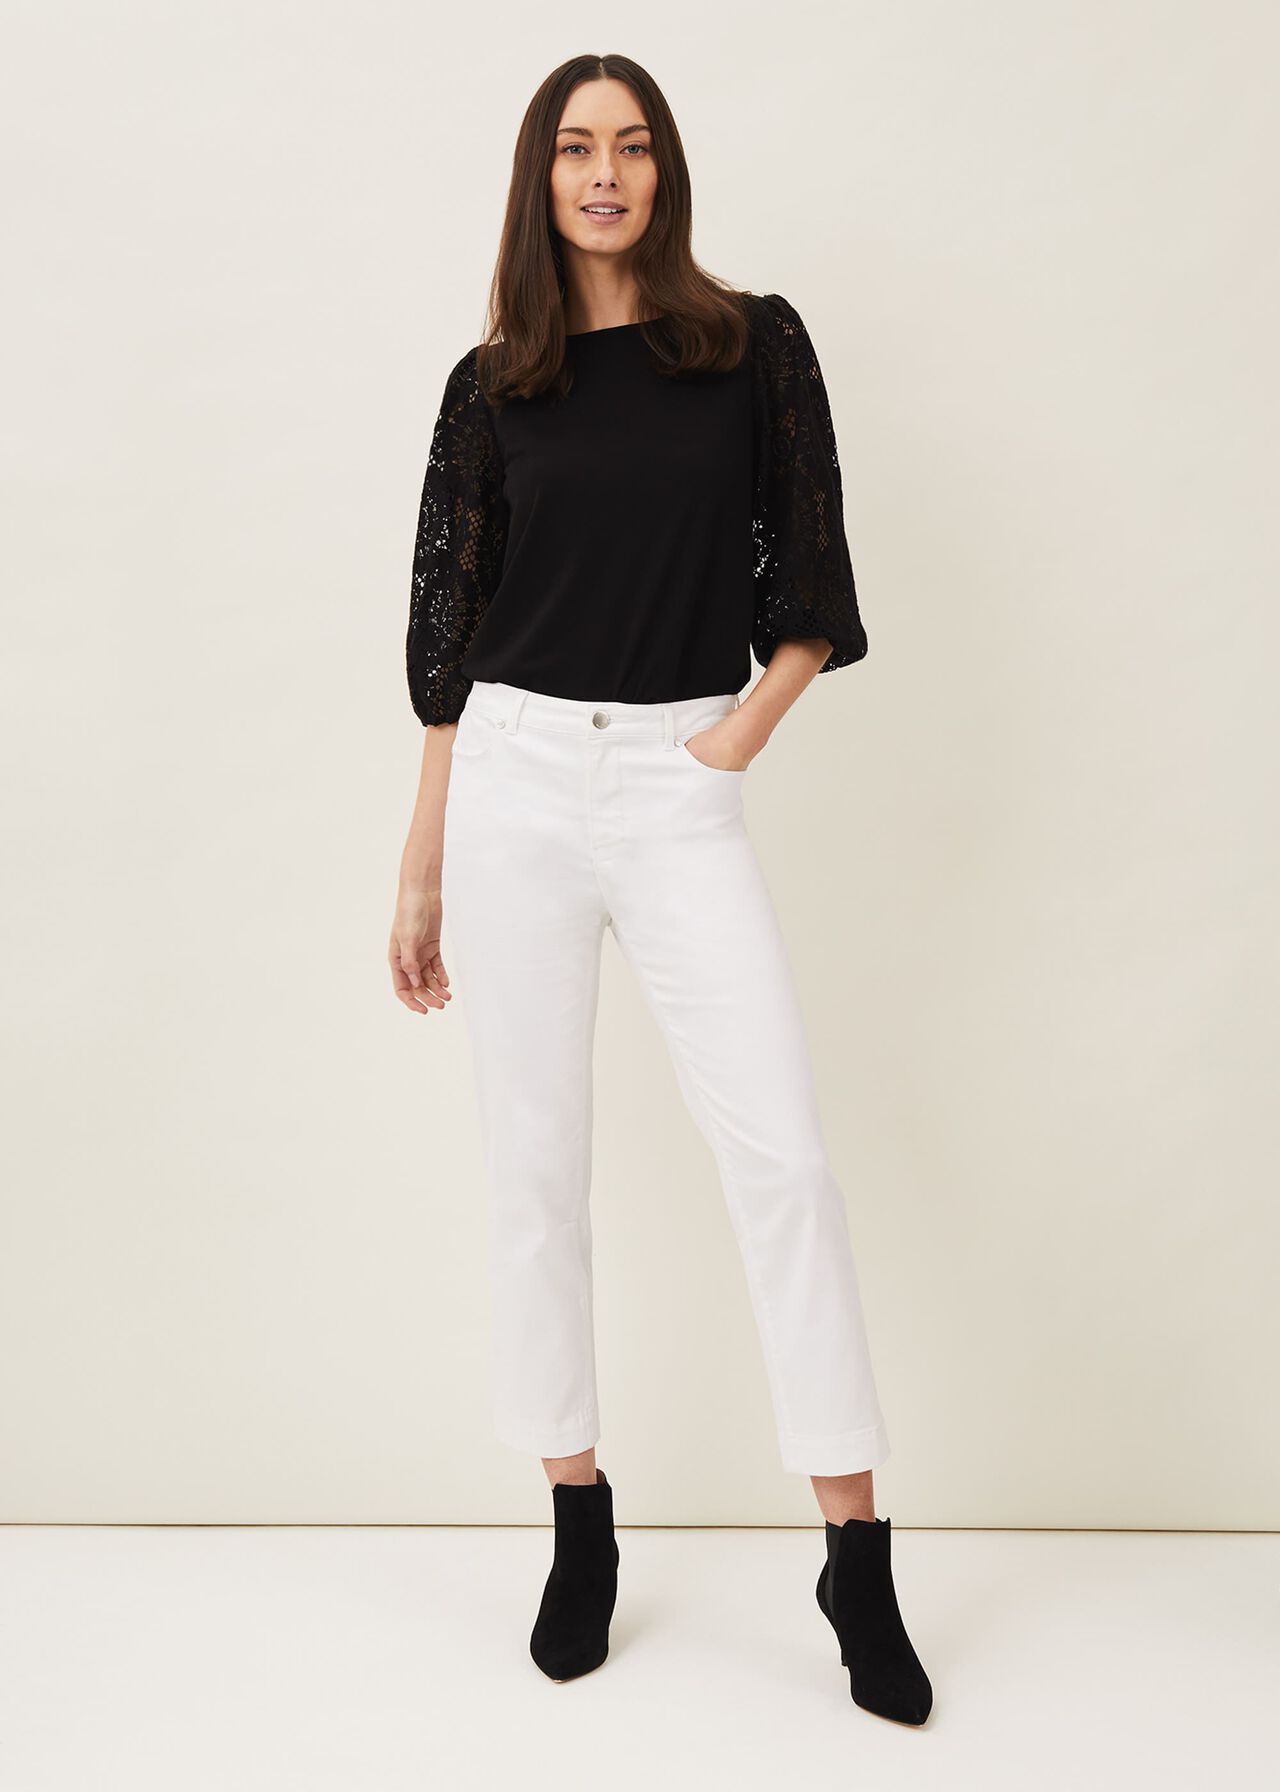 Lanna Lace Puff Sleeve Top